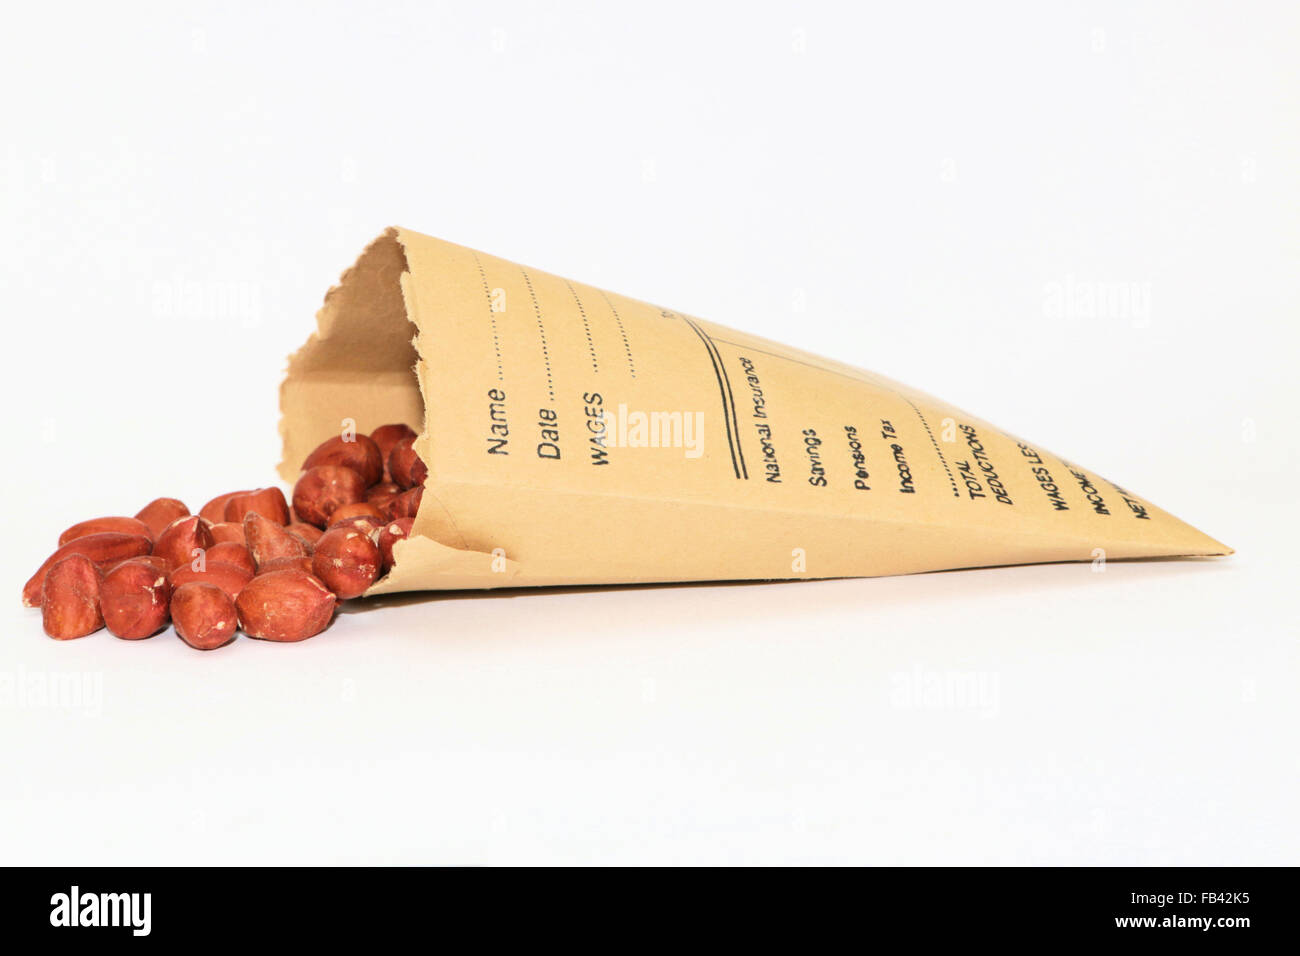 Wage packet containing peanuts Stock Photo